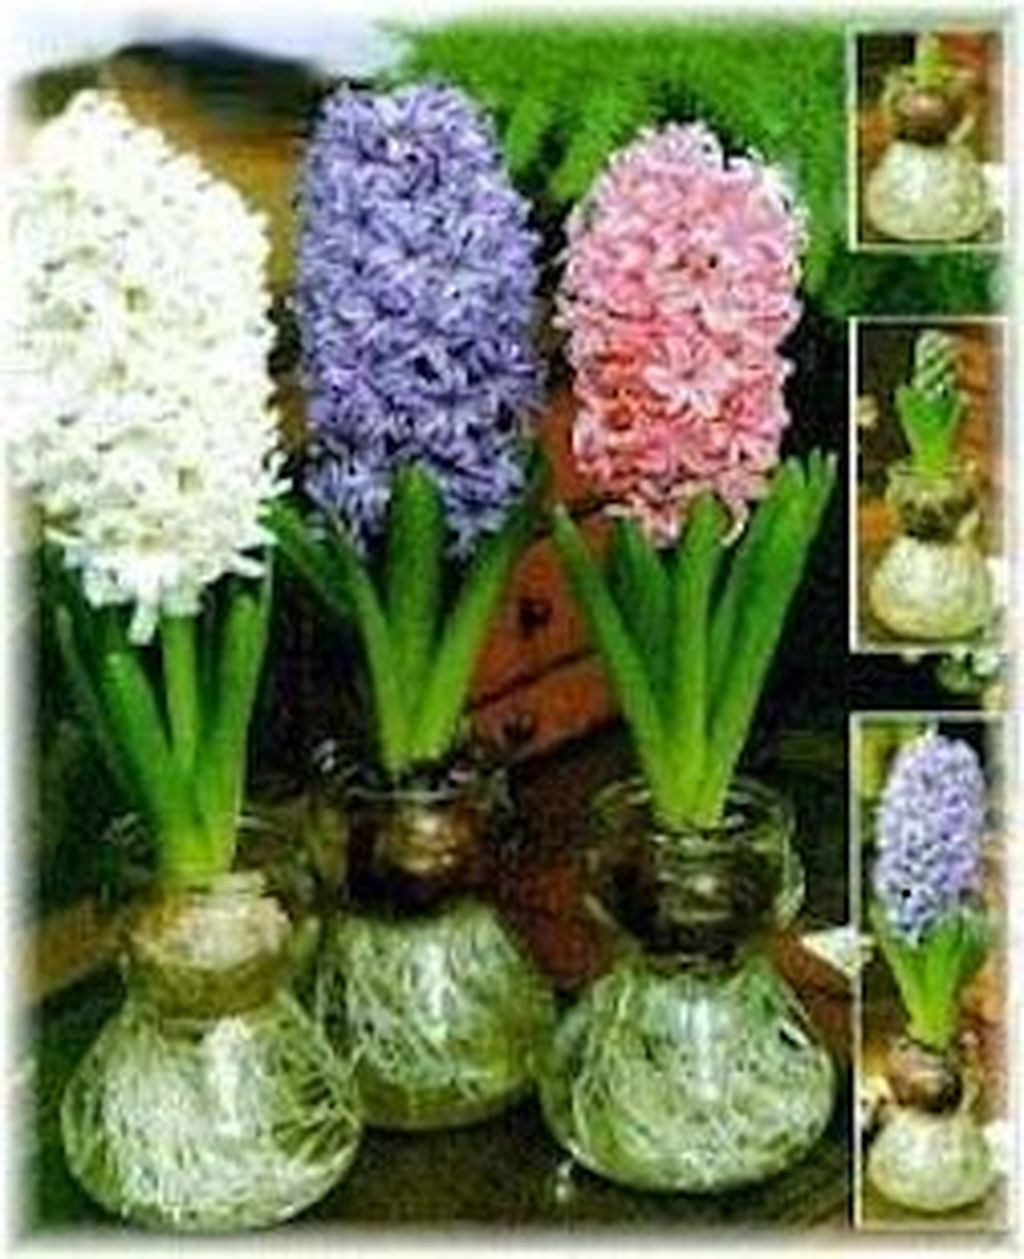 35 Awesome Ideas To Make Glass Jars Garden For Your Home Decor - HOMISHOME